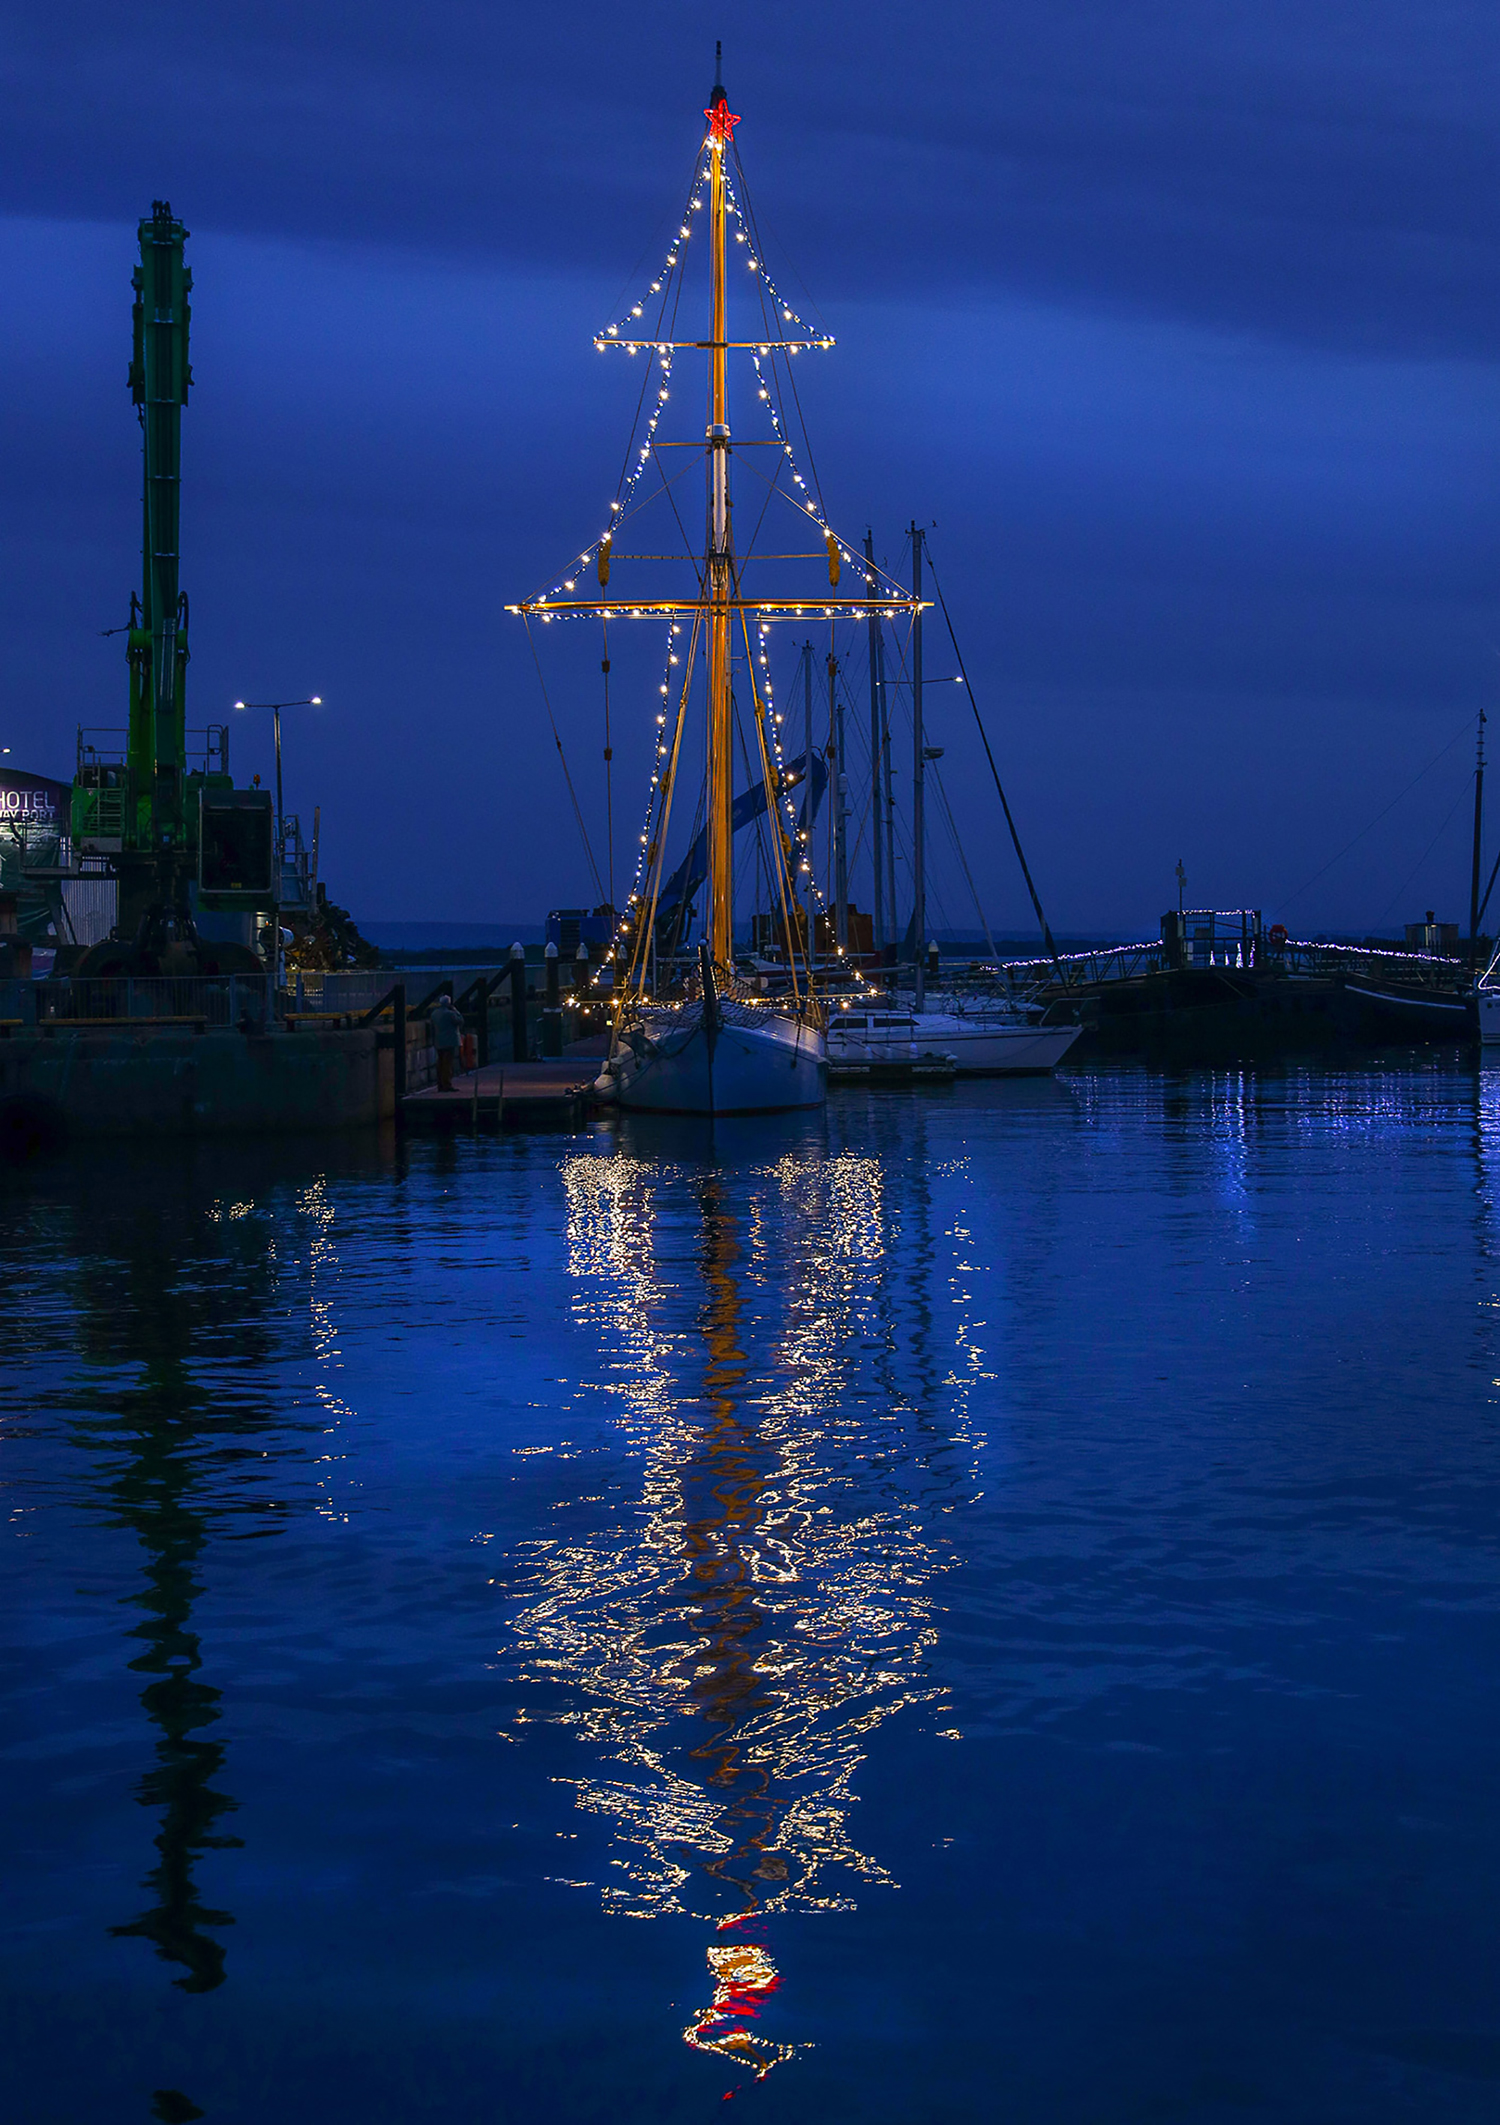 christmas tree, ishka, spring water, ishka spring water, galway docks, galway city, switching on of christmas lights, ilen, gary MacMahon, Mike Sutton, Brian Sheridan, Harbour master, sustainable, port of galway, 